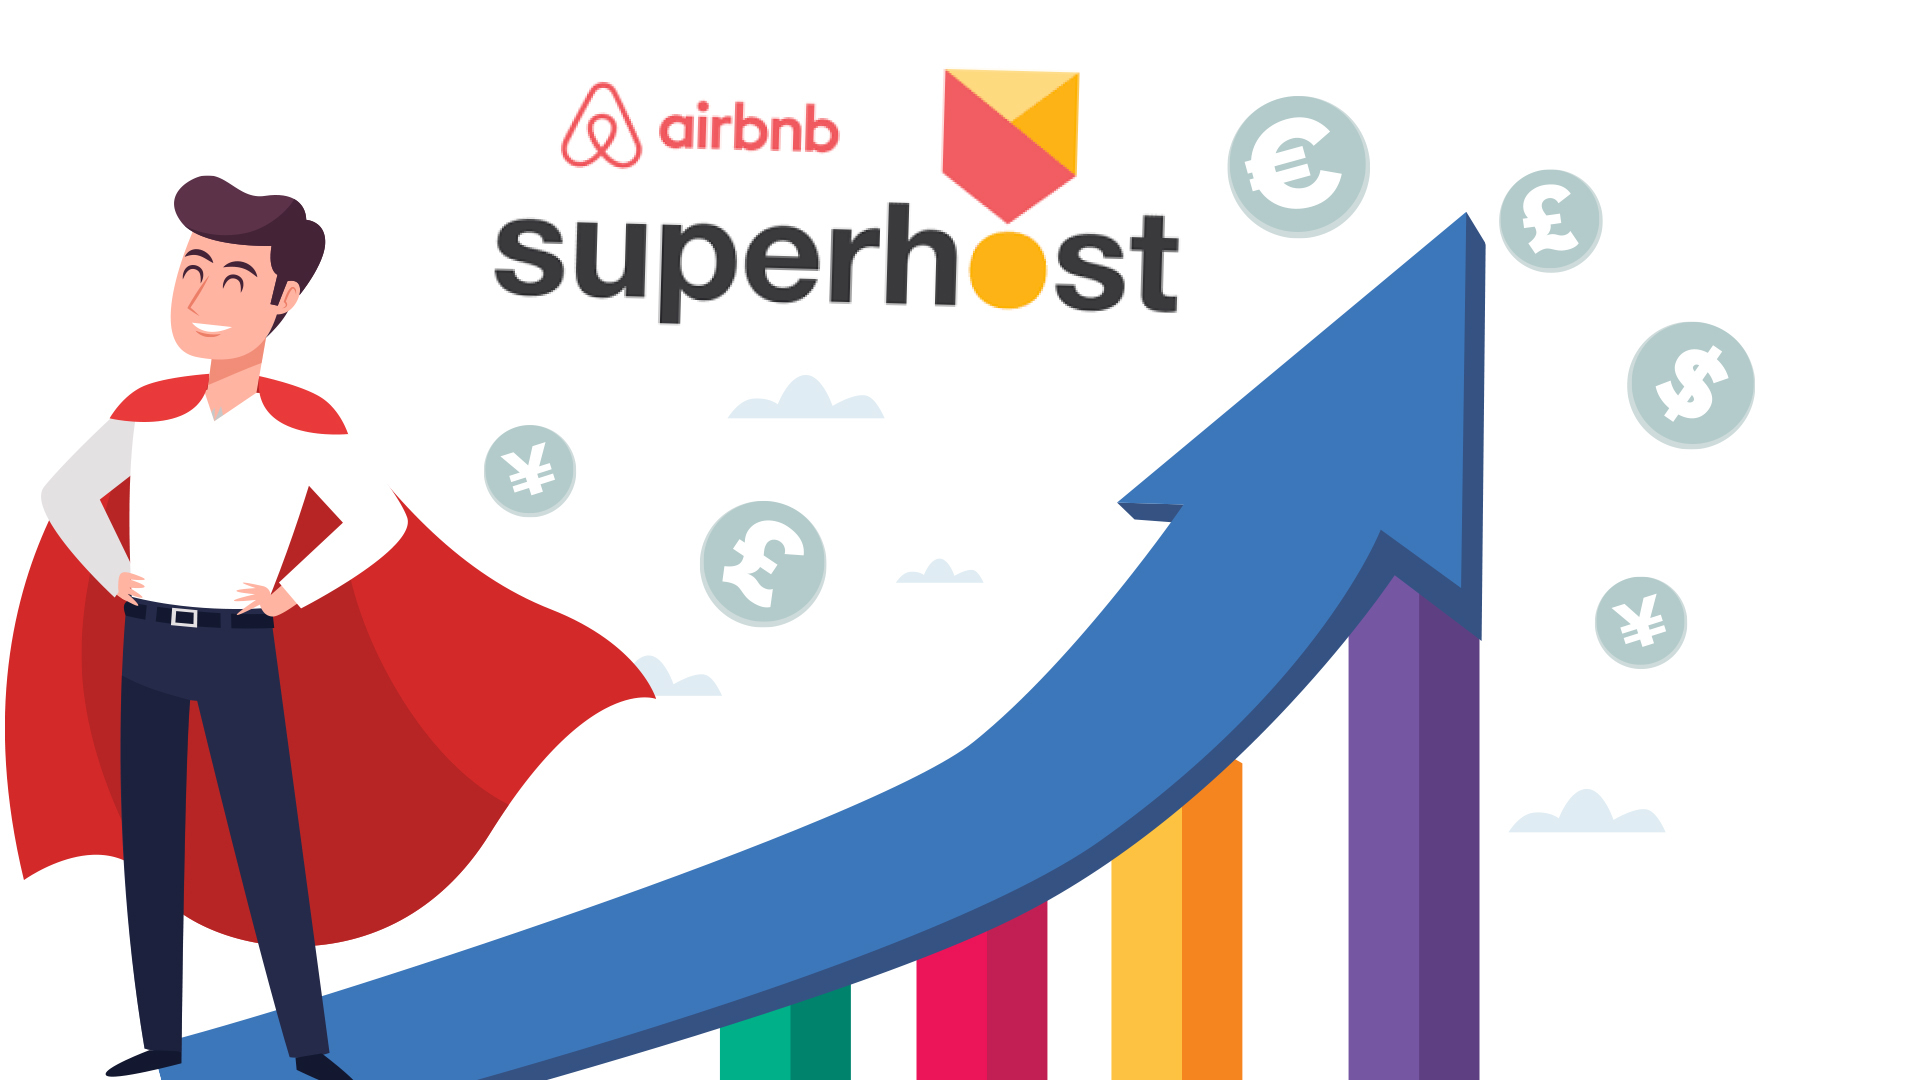 An illustration showing an Airbnb Superhost with symbols indicating increased revenue, labeled 'Airbnb Superhost.' Various currency icons are depicted to represent earnings.